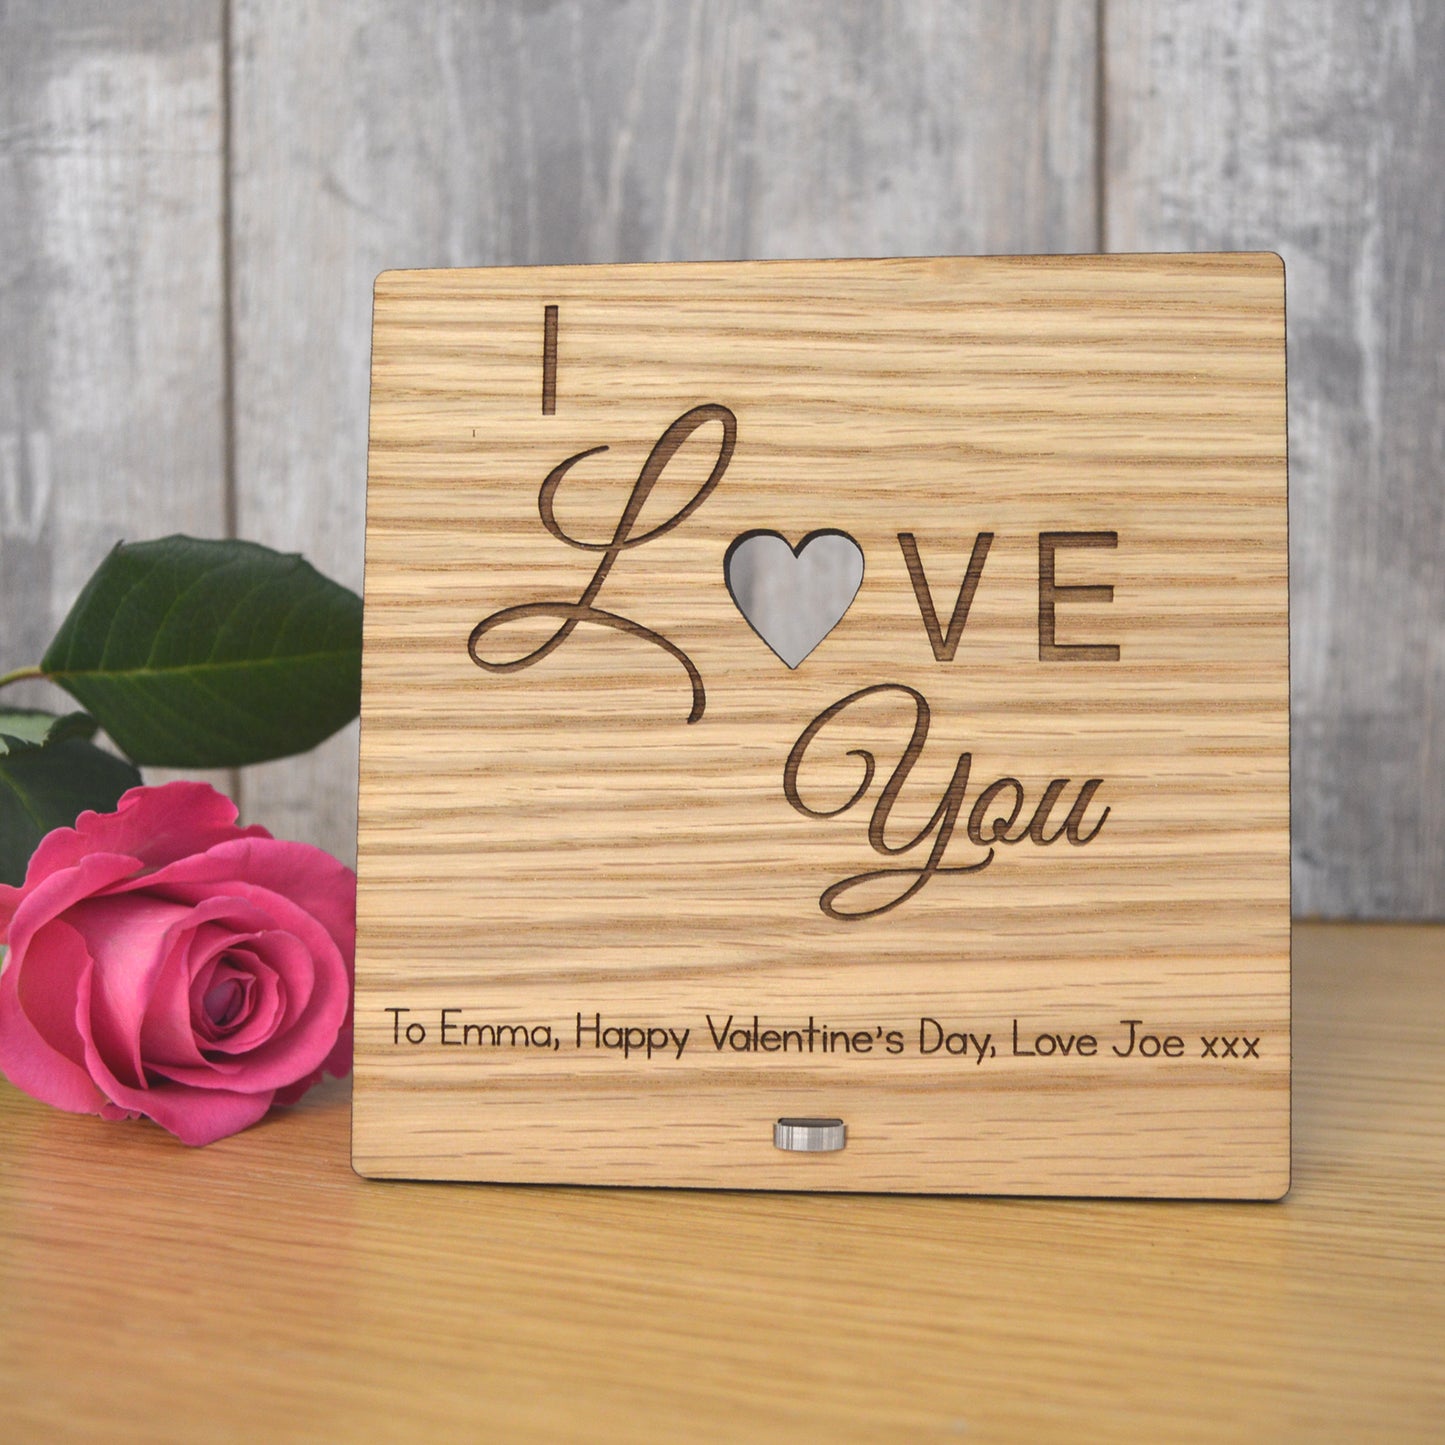 I Love You - Simple Romantic Valentines Day Wooden Plaque